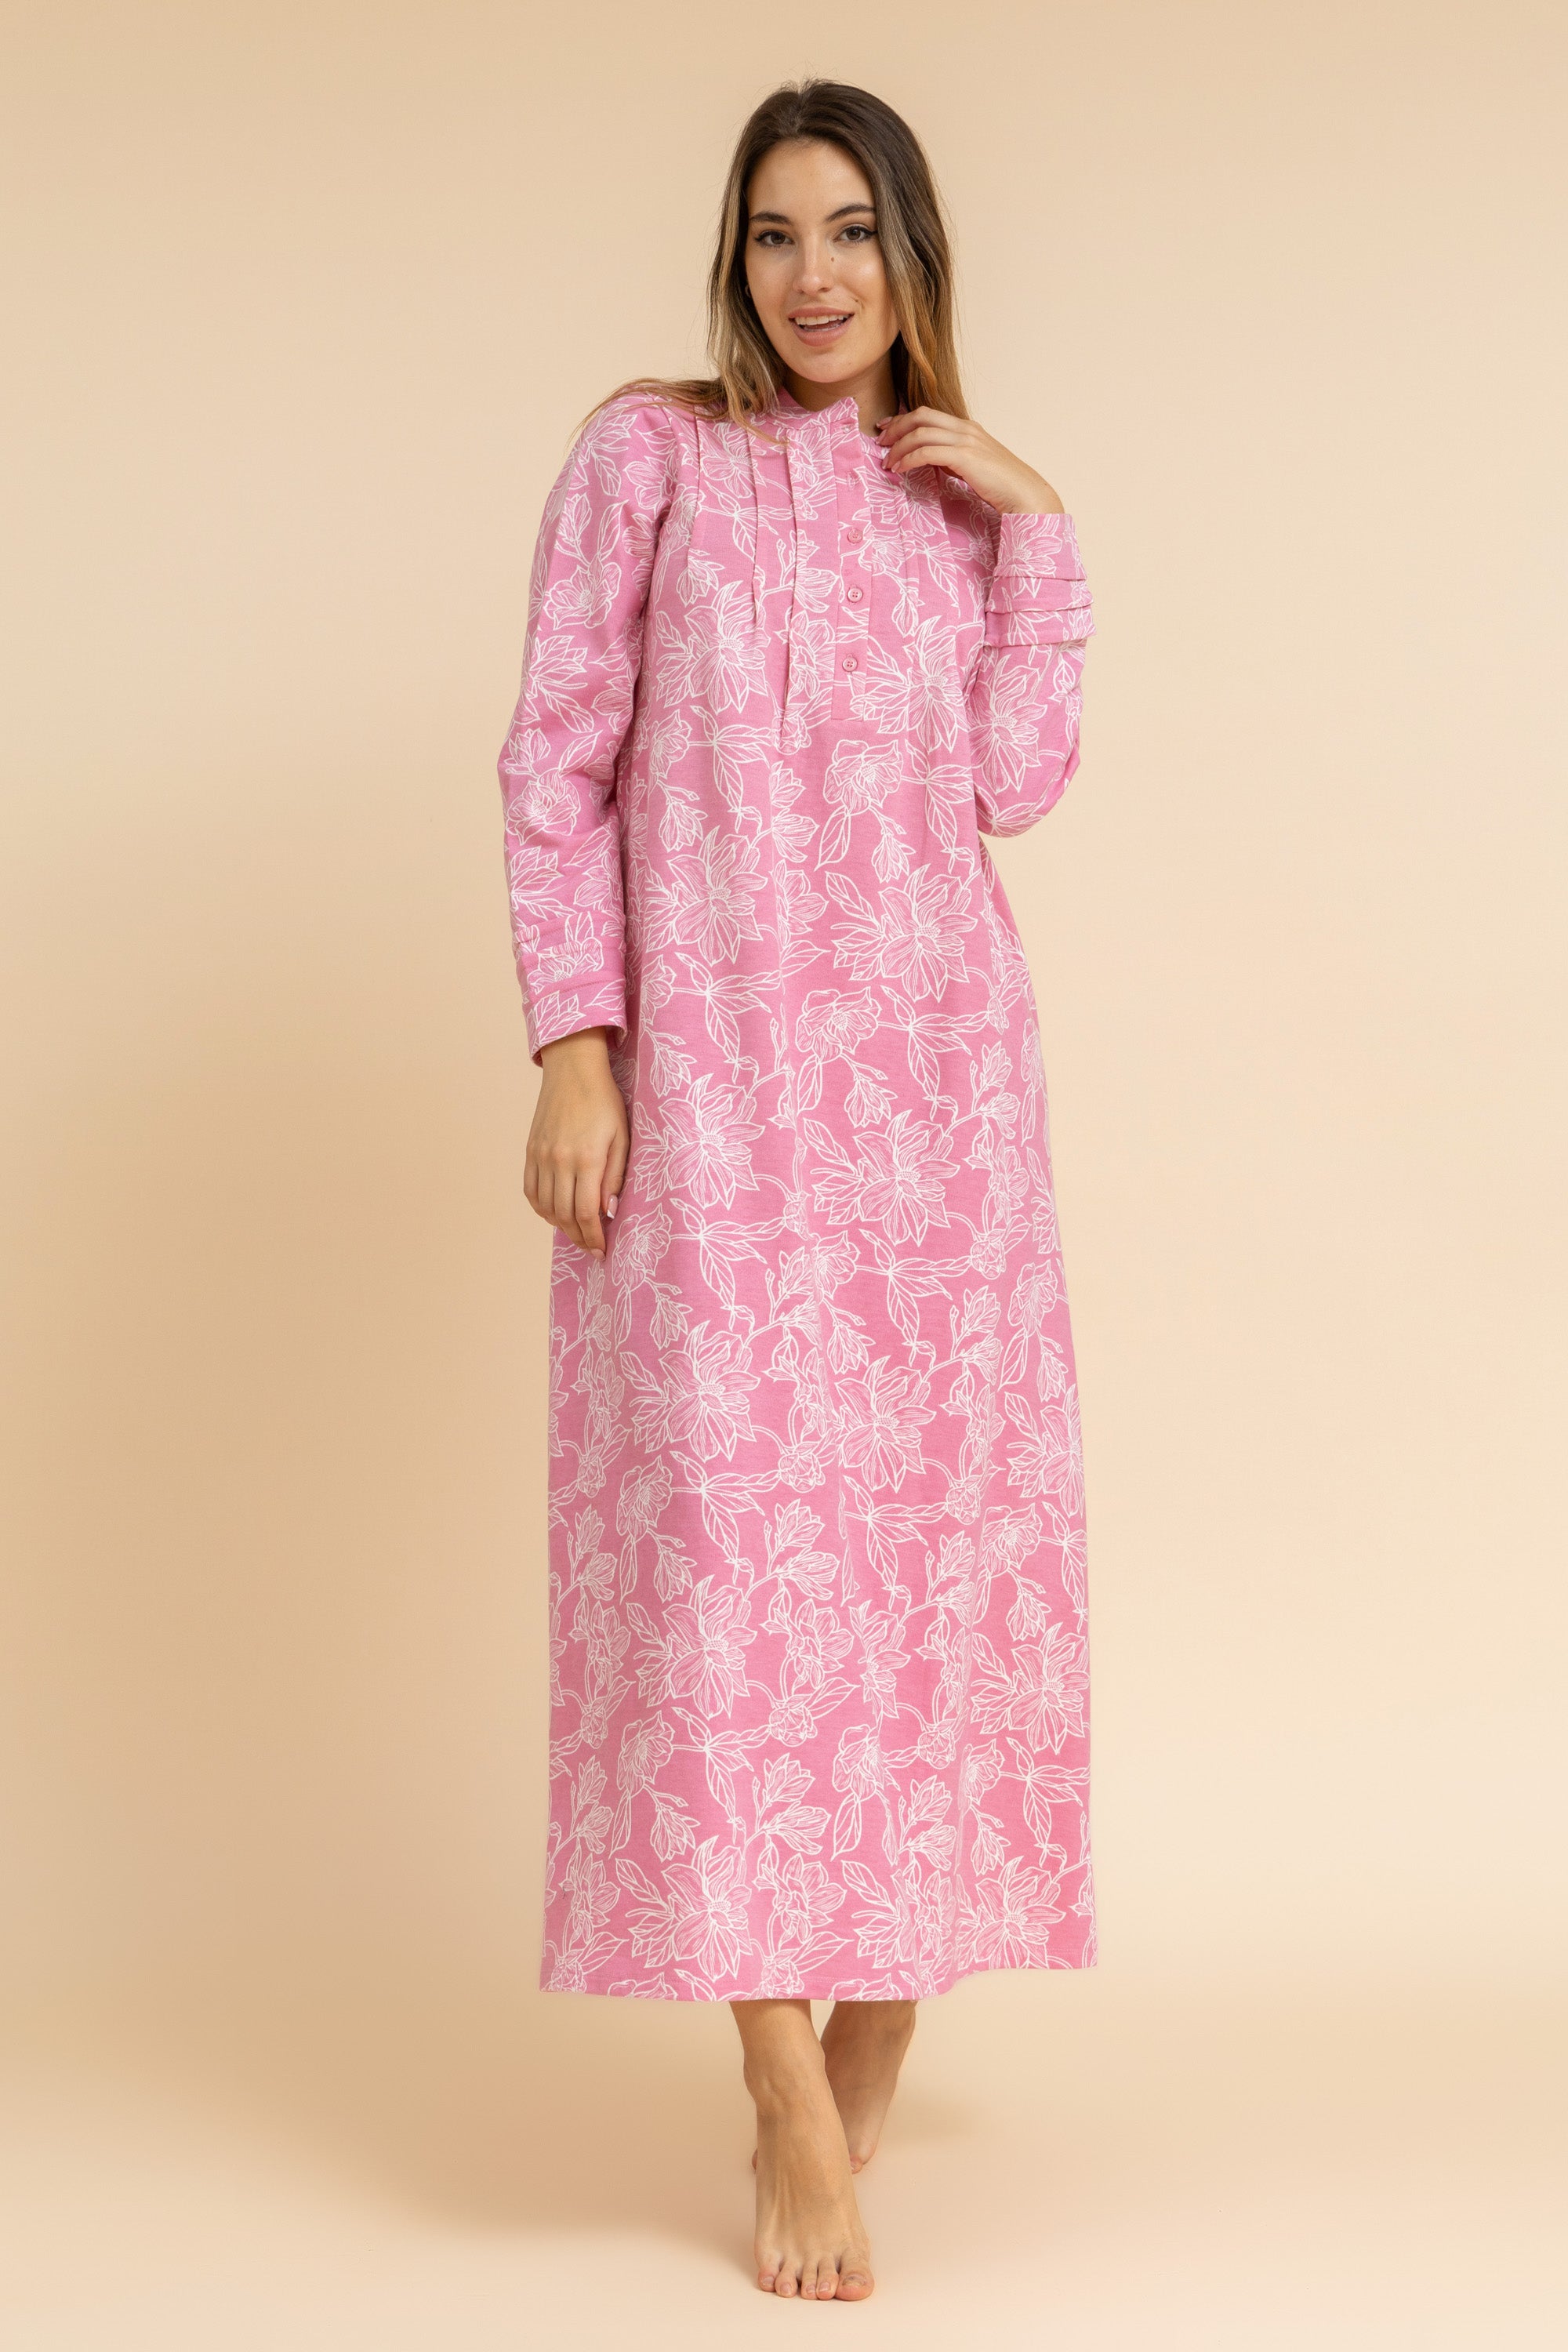 Floral Print 100% cotton nightgown with button detail